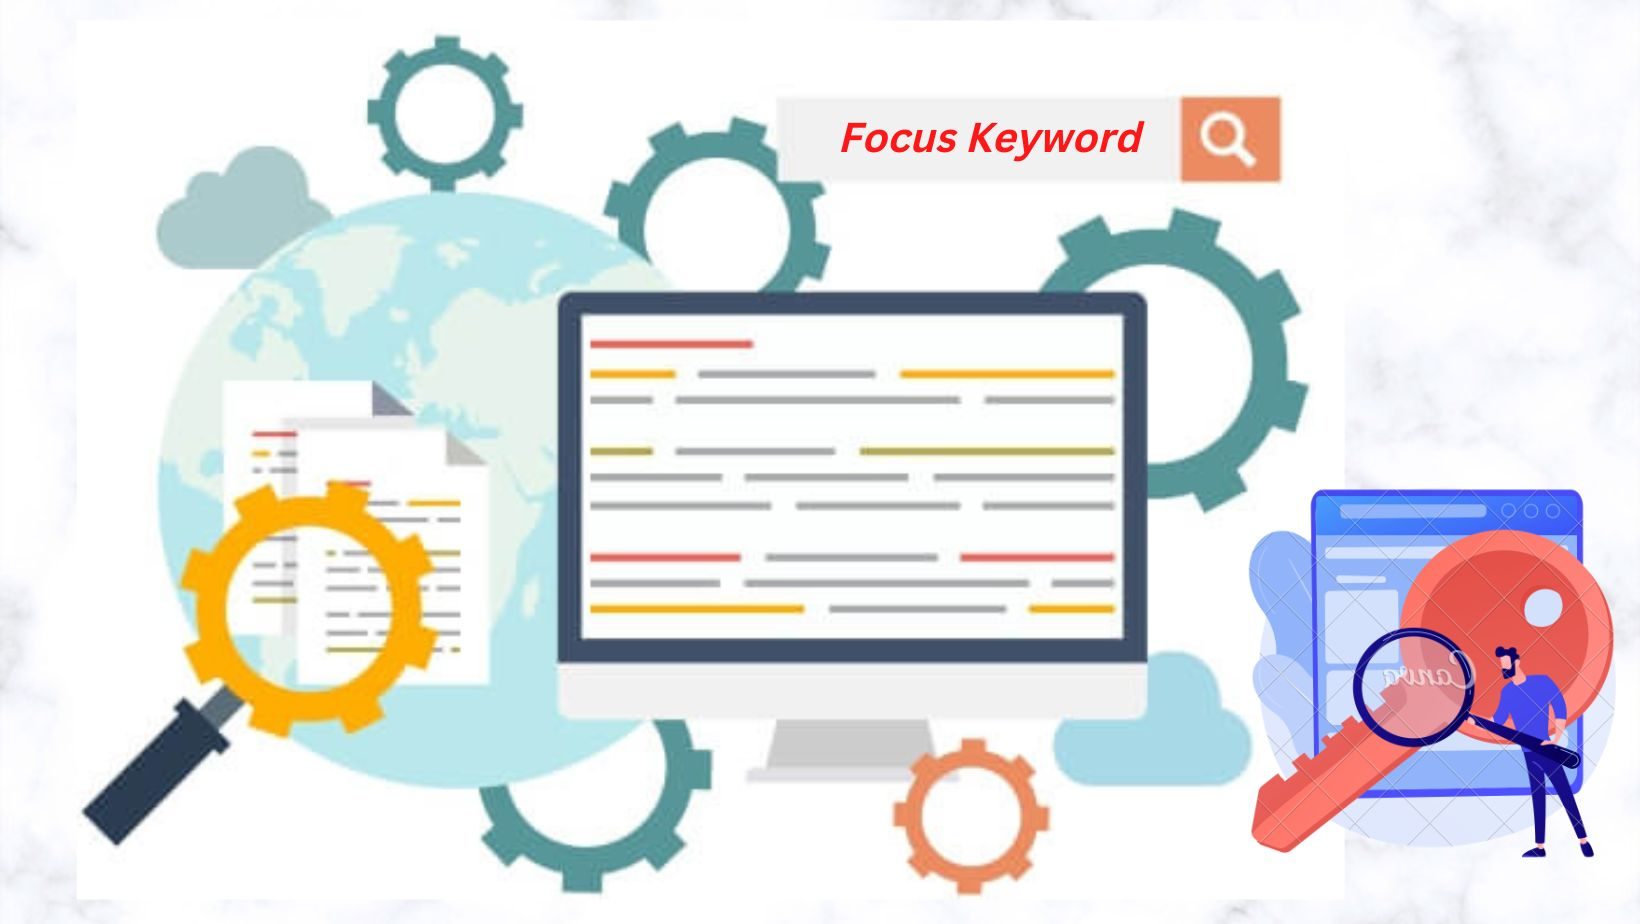 Focus Keyword for SEO Blog Content to Optimize